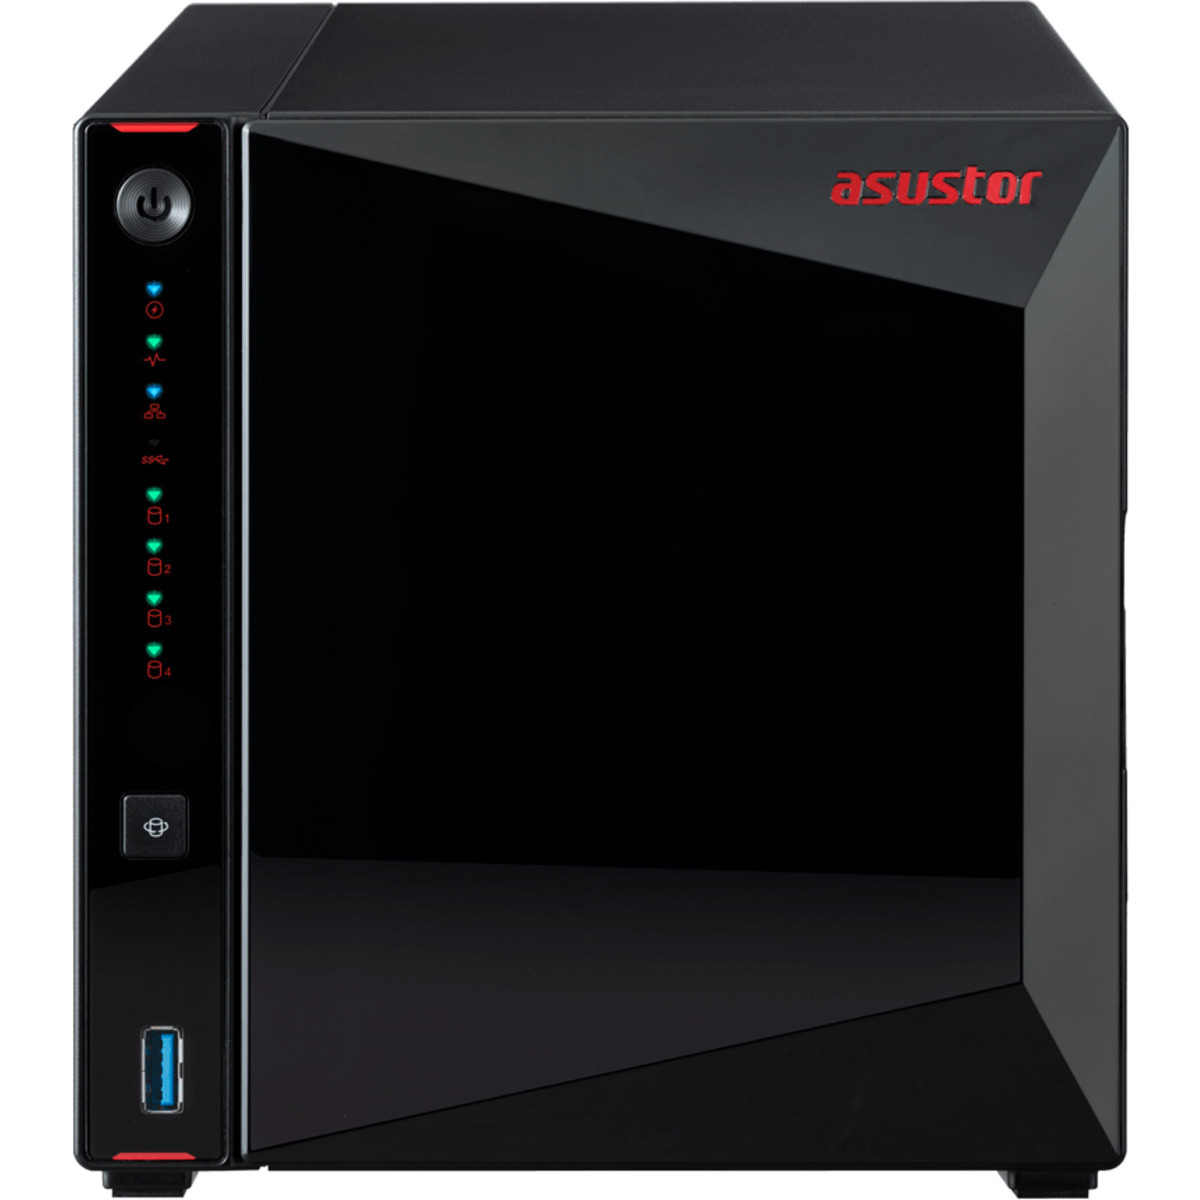 ASUSTOR AS5304T Nimbustor 48tb 4-Bay Desktop Multimedia / Power User / Business NAS - Network Attached Storage Device 4x12tb Seagate EXOS X18 ST12000NM000J 3.5 7200rpm SATA 6Gb/s HDD ENTERPRISE Class Drives Installed - Burn-In Tested - FREE RAM UPGRADE AS5304T Nimbustor